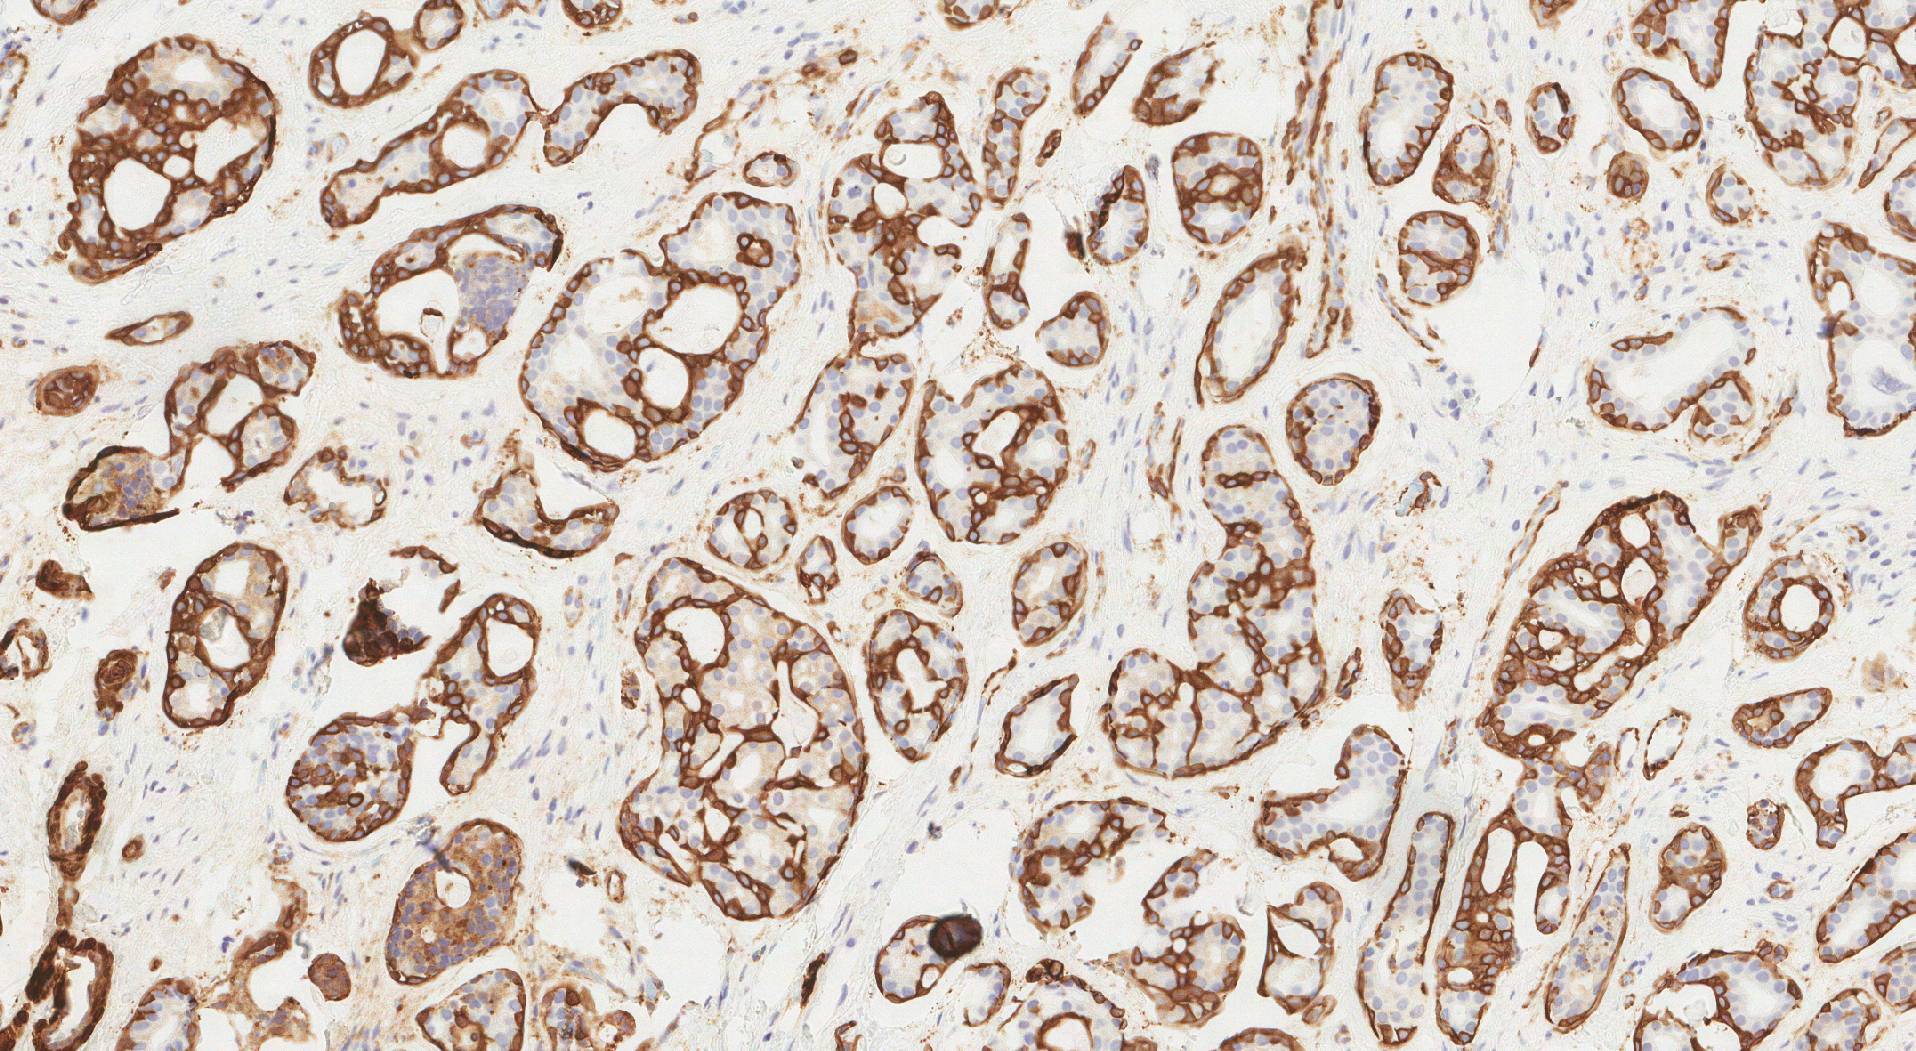 This picture shows smooth muscle actin positive cells (brown) highlighted by immunohistochemistry.